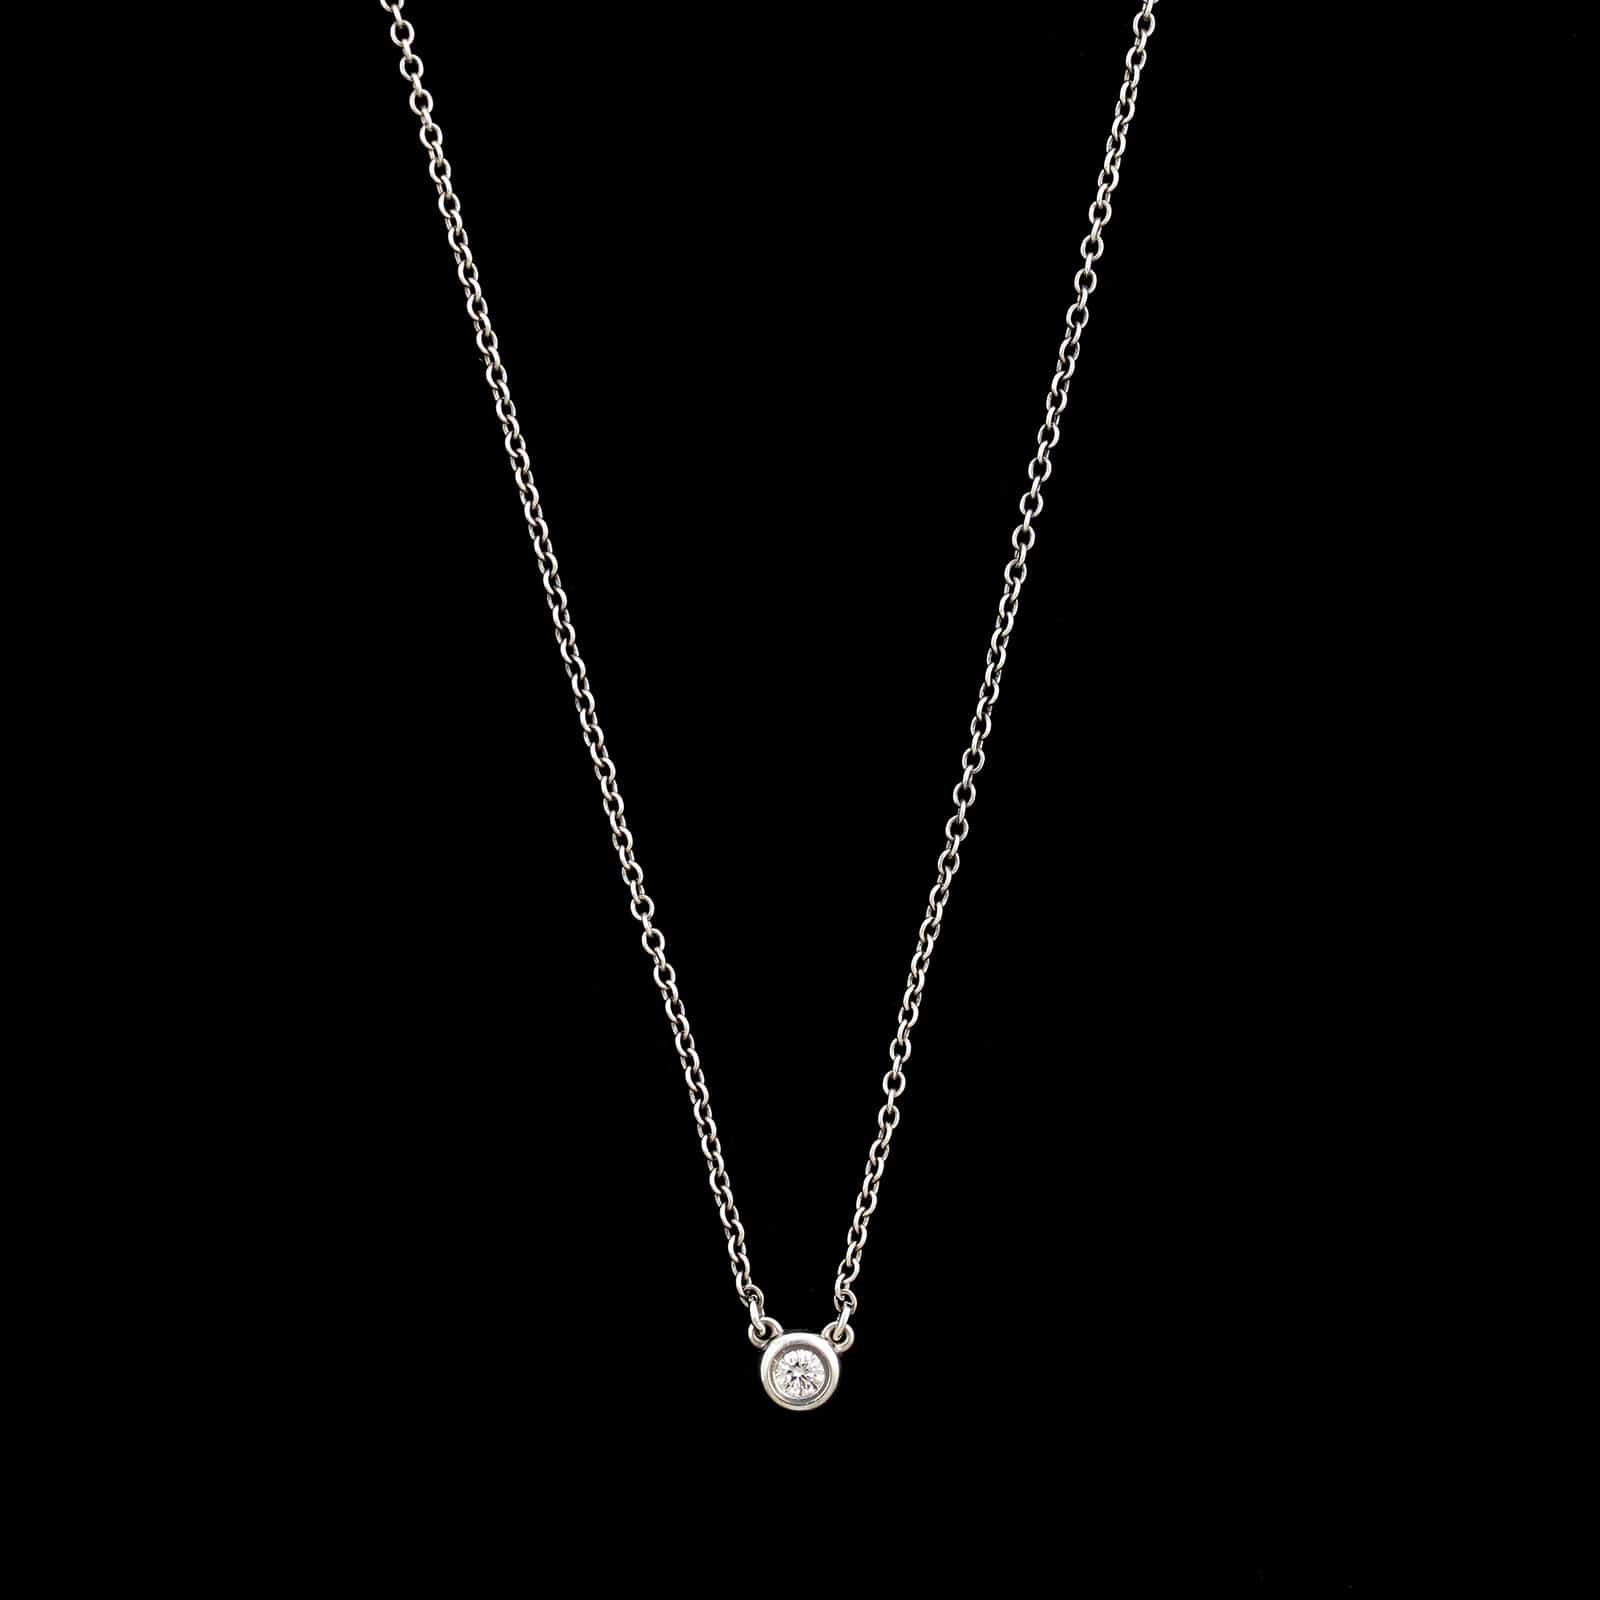 Tiffany &amp; Co. Sterling Silver Estate Diamond By the Yard Diamond Pendant Necklace&nbsp;